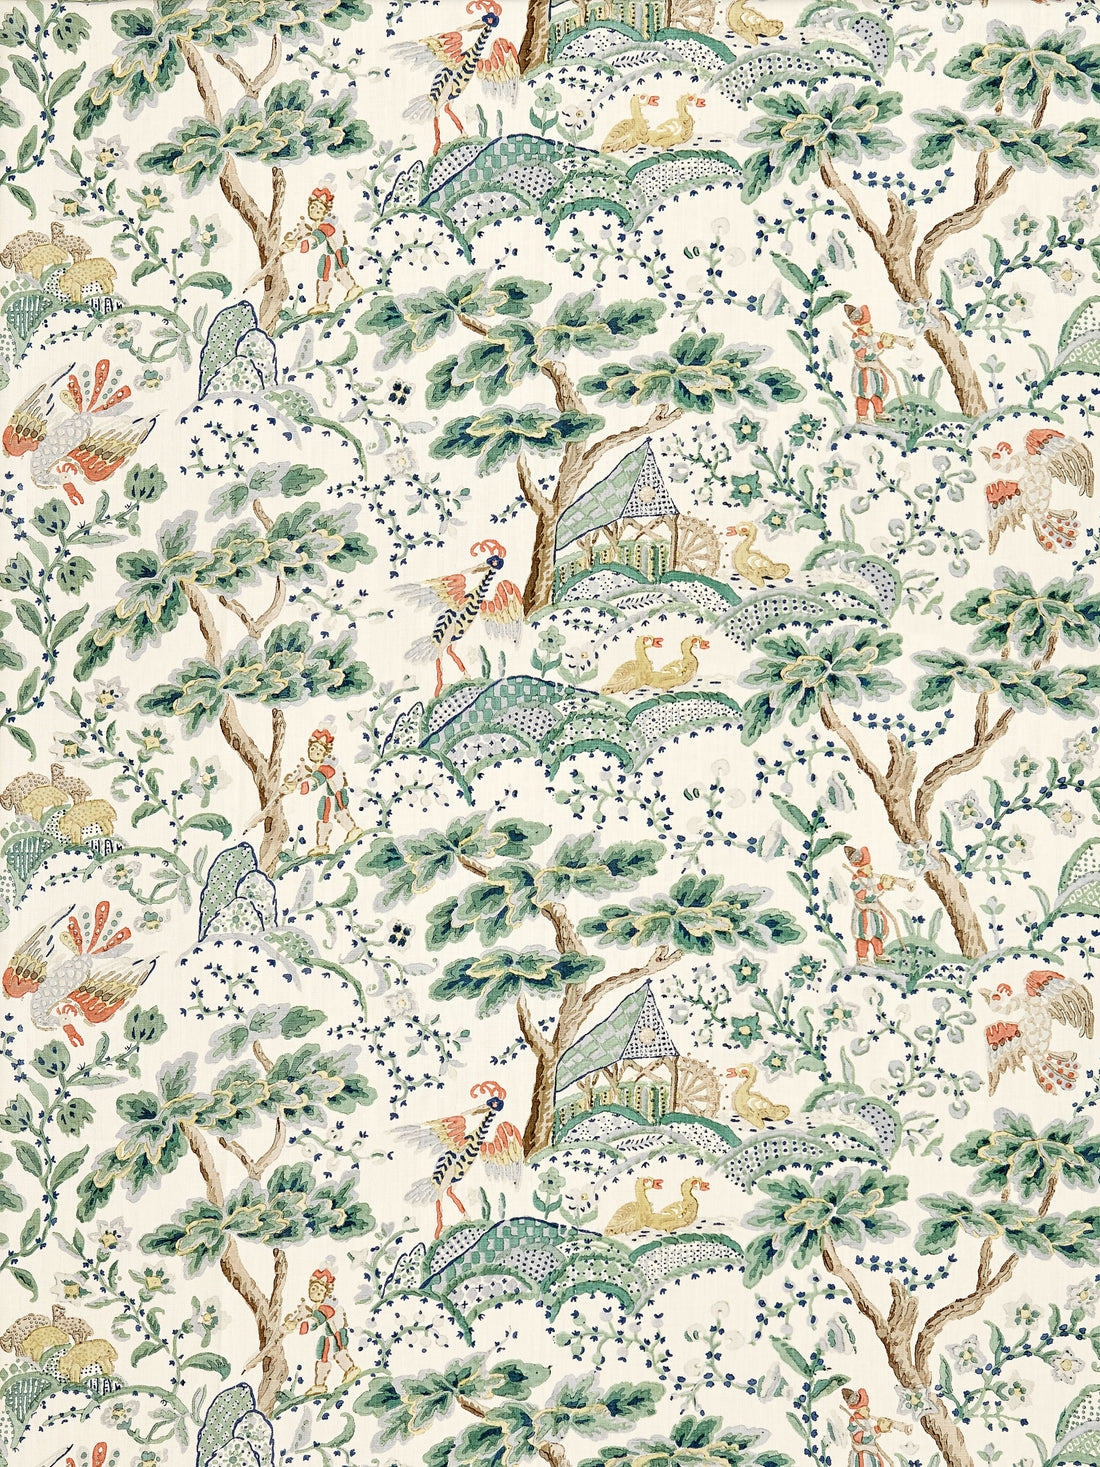 Kelmescott Hand Block Print fabric in leaf on ivory color - pattern number SC 000216590 - by Scalamandre in the Scalamandre Fabrics Book 1 collection